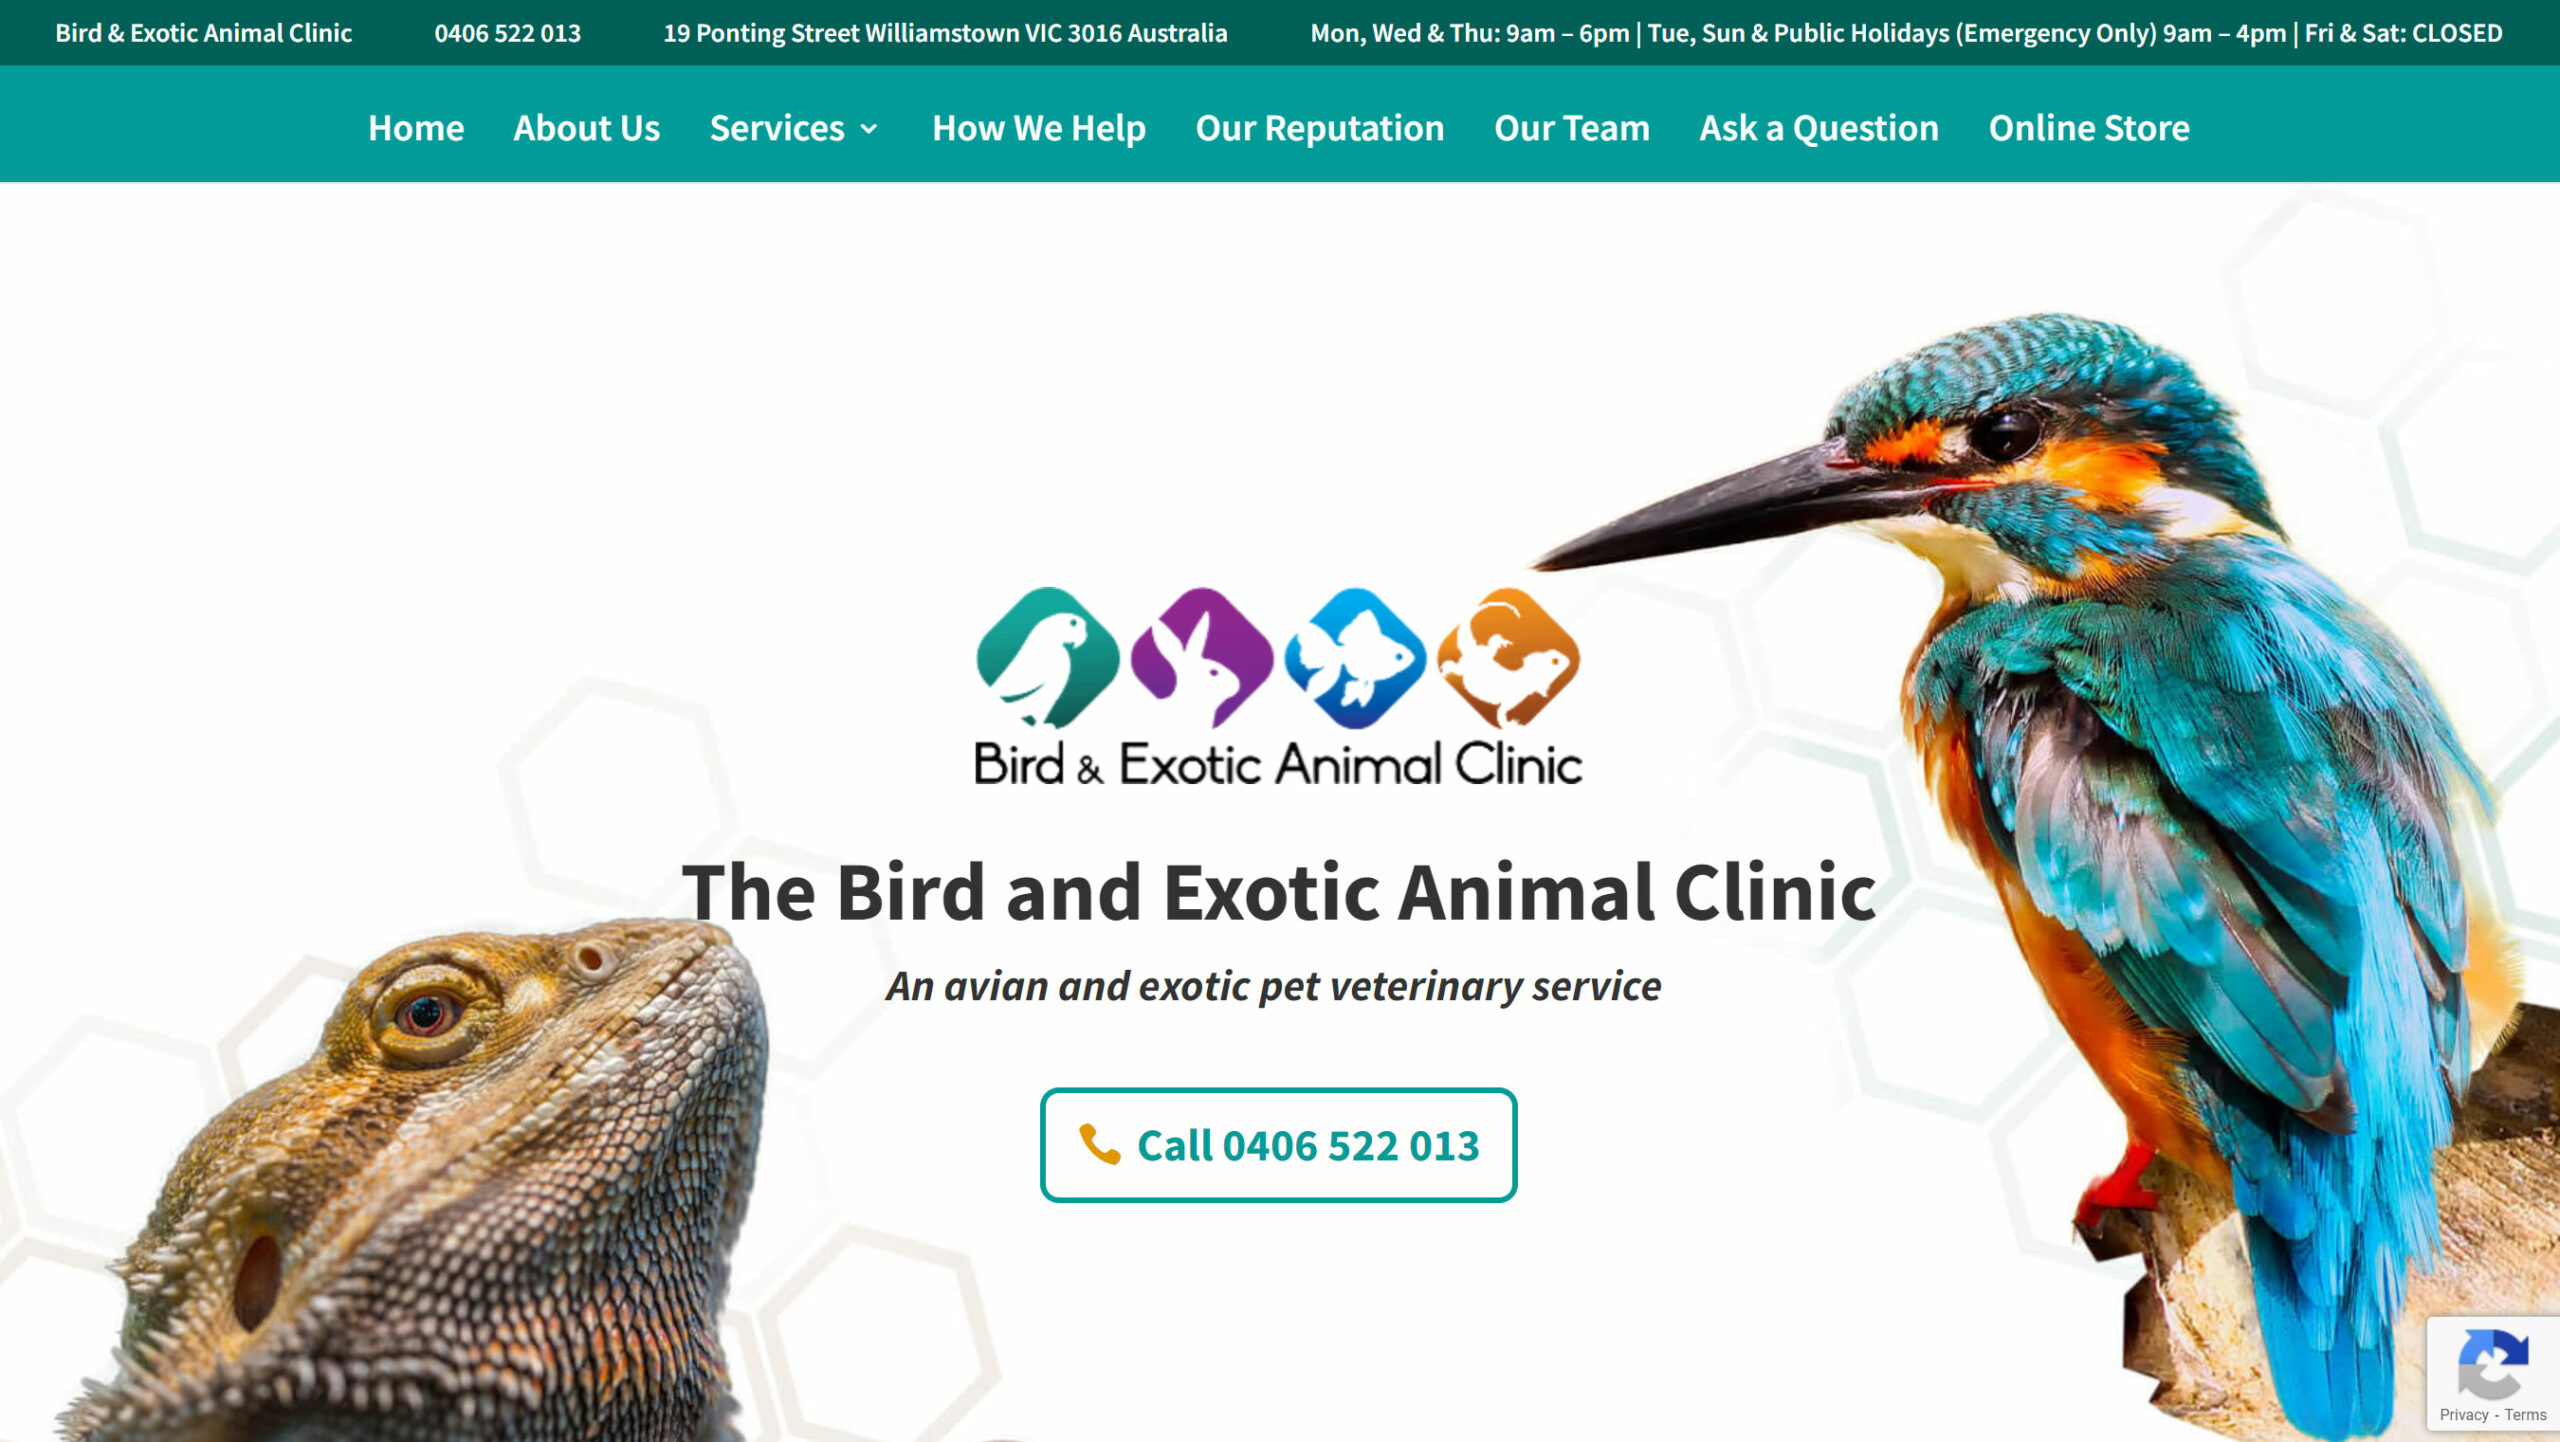 PetPack Websites - The Bird and Exotic Animal Clinic